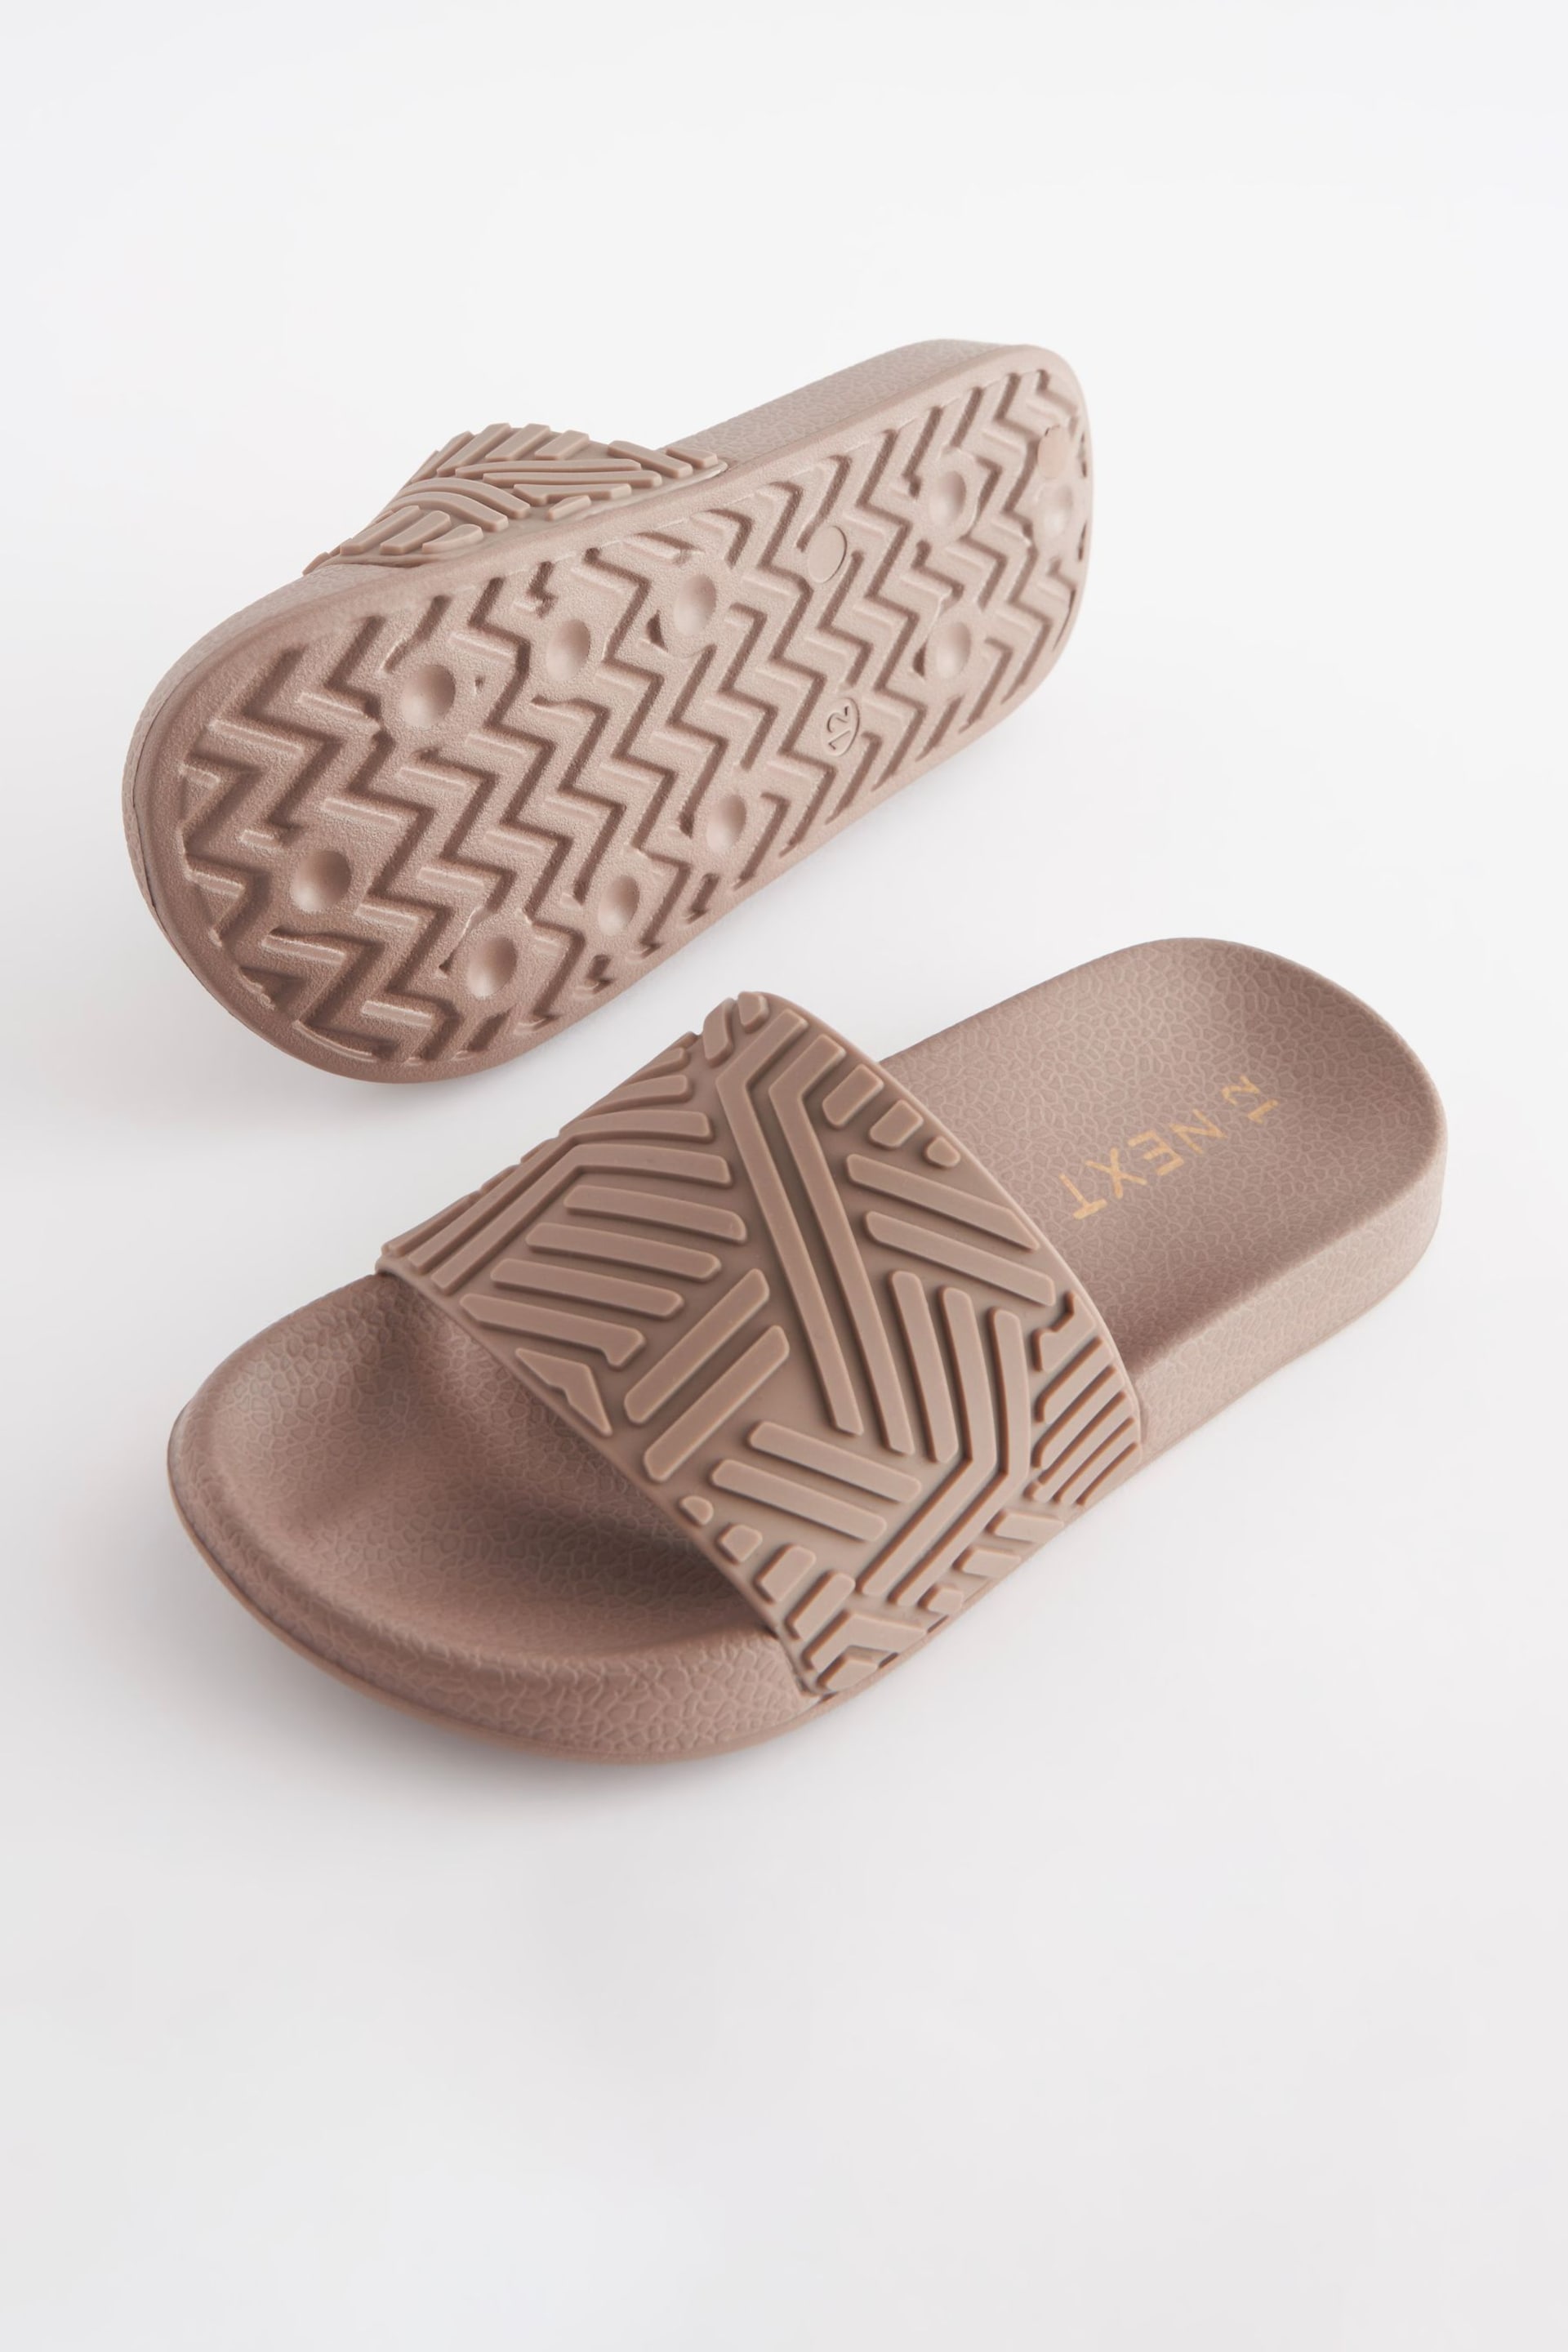 Cement Patterned Sliders - Image 4 of 5